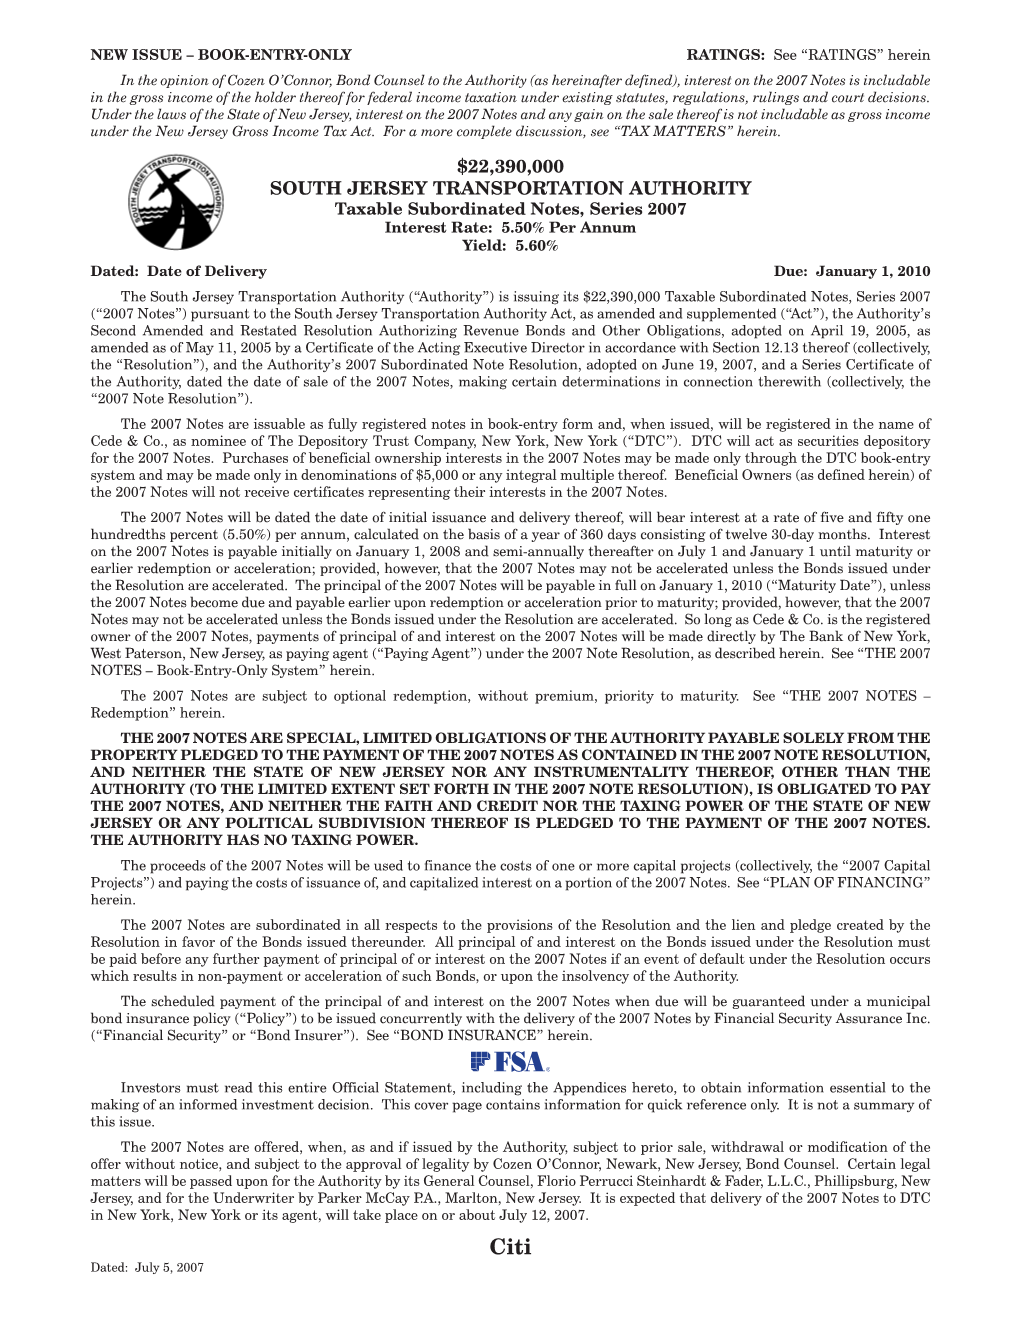 Official Statement (PRINTED).Pdf